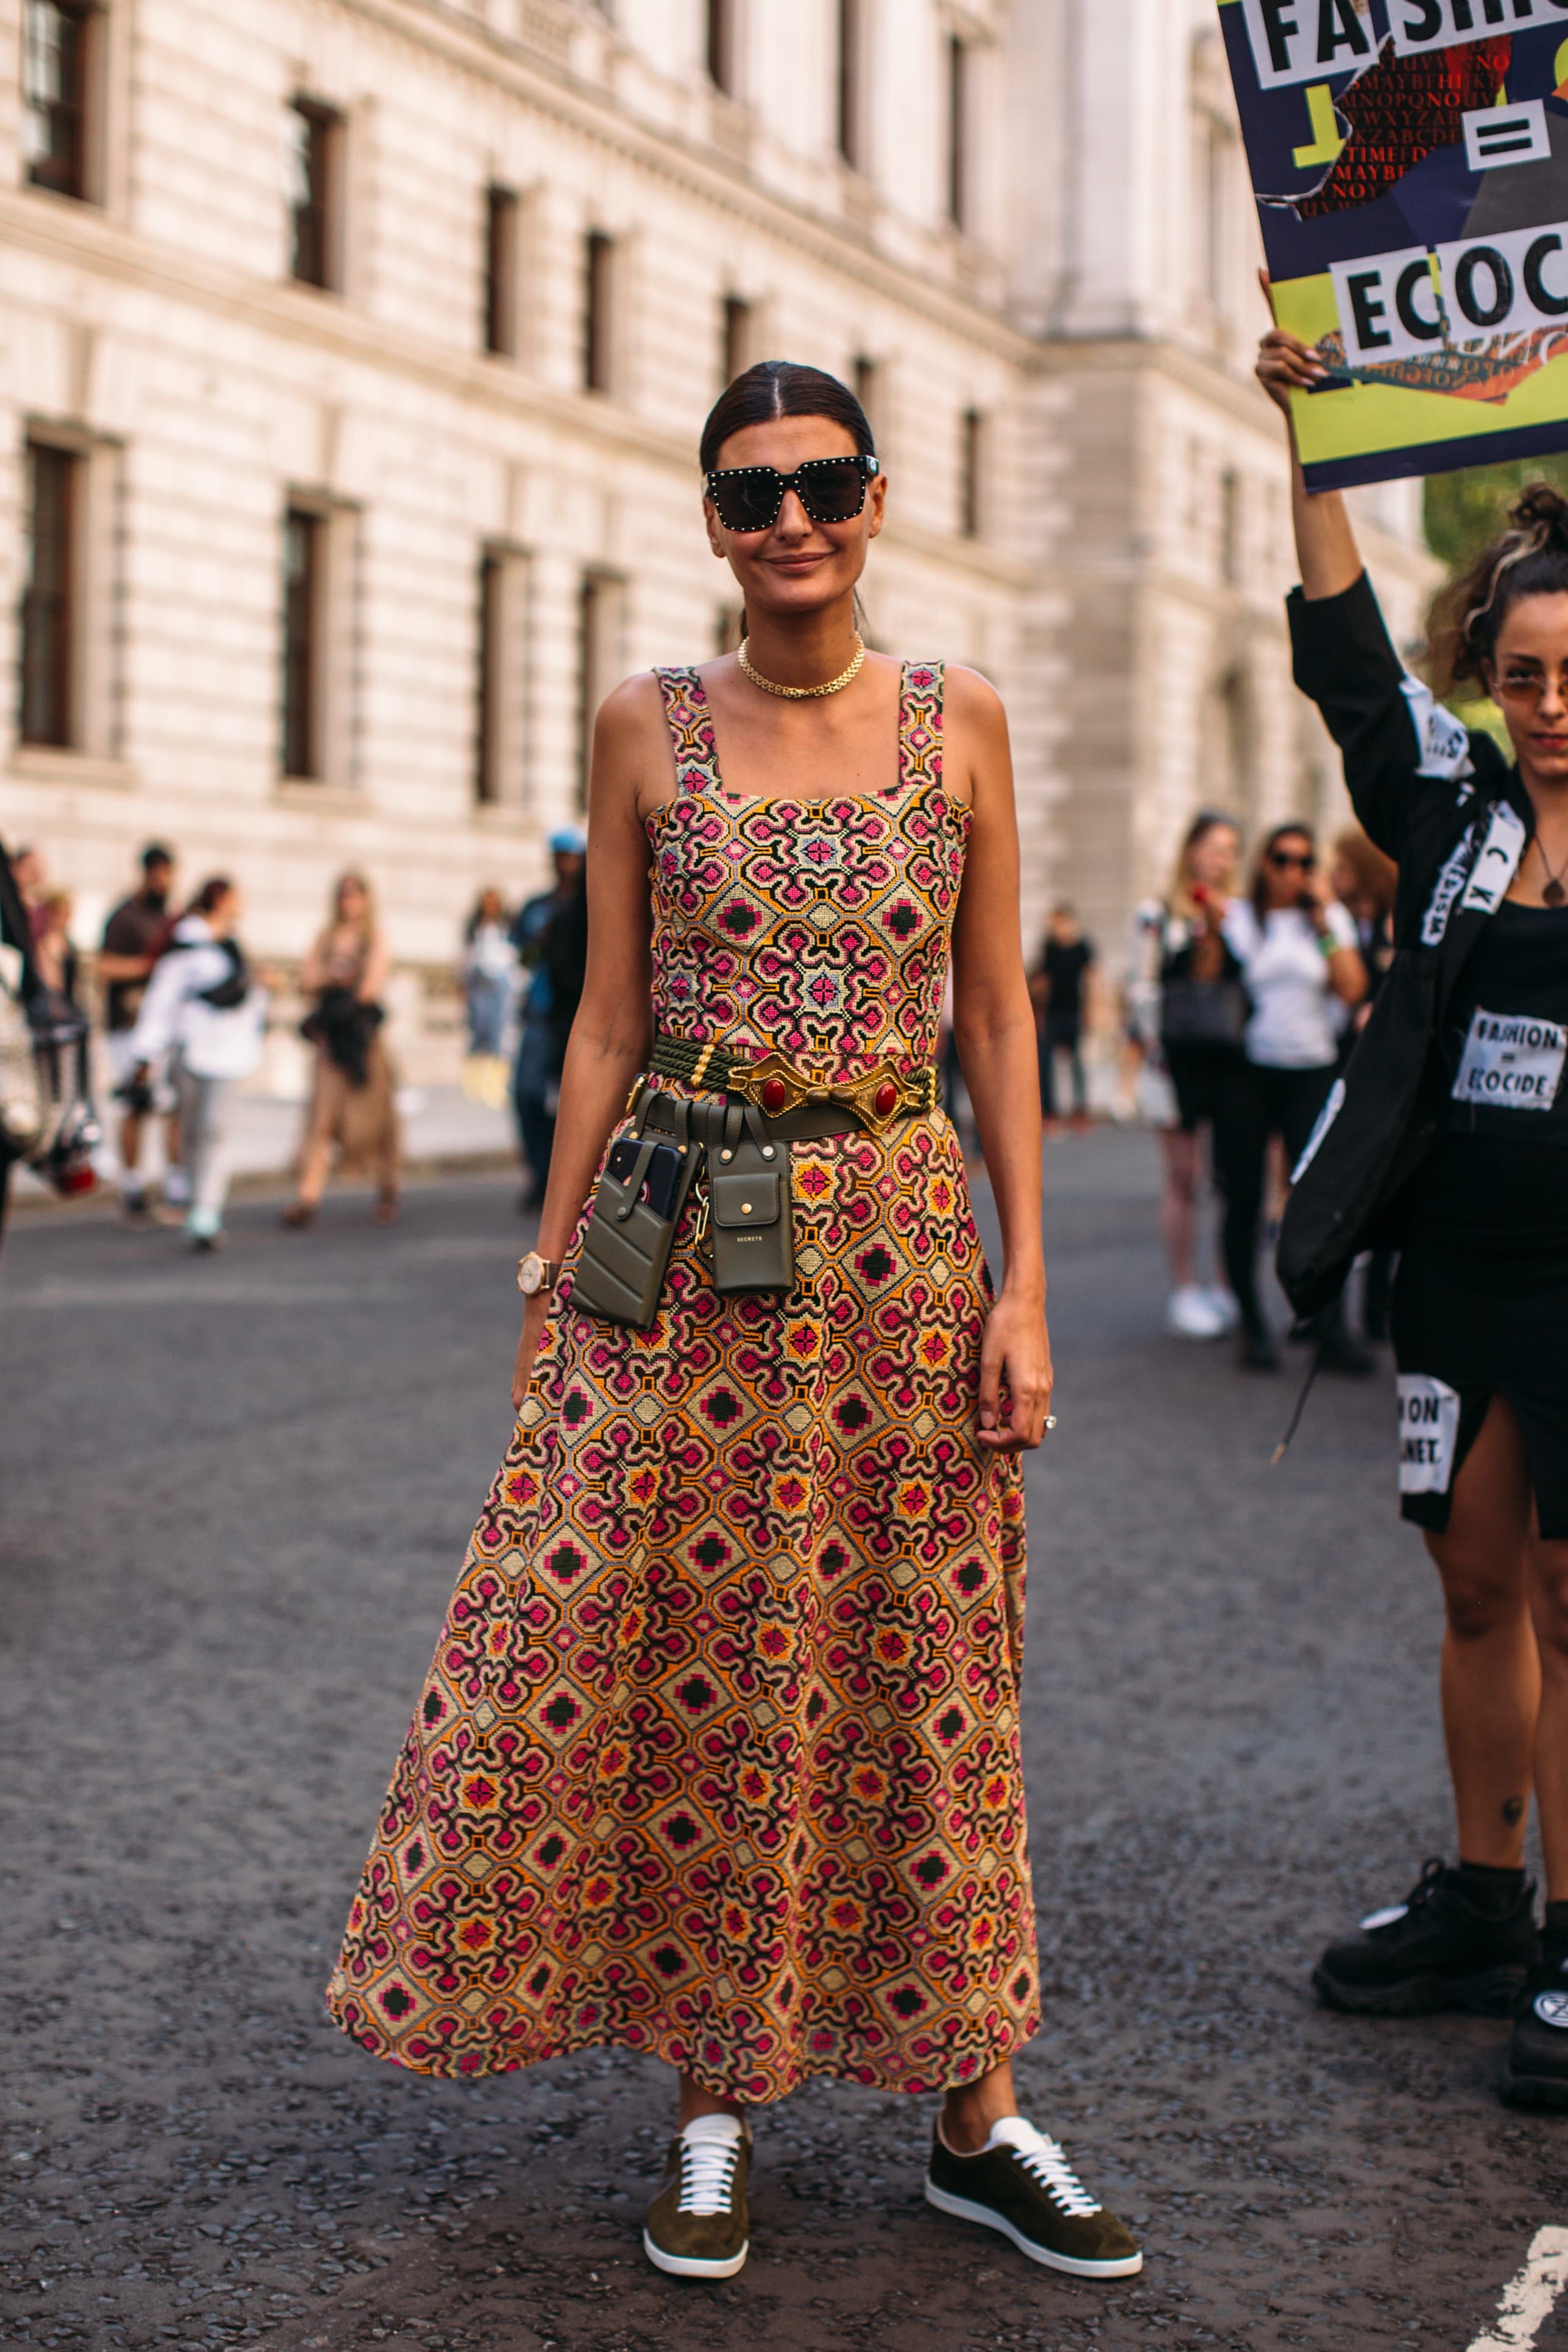 The Best Street Style Looks from London Fashion Week S/S20 (so far!) - The Best Street Style Looks from London Fashion Week S/S20 (so far!) -   17 london style 2019 ideas